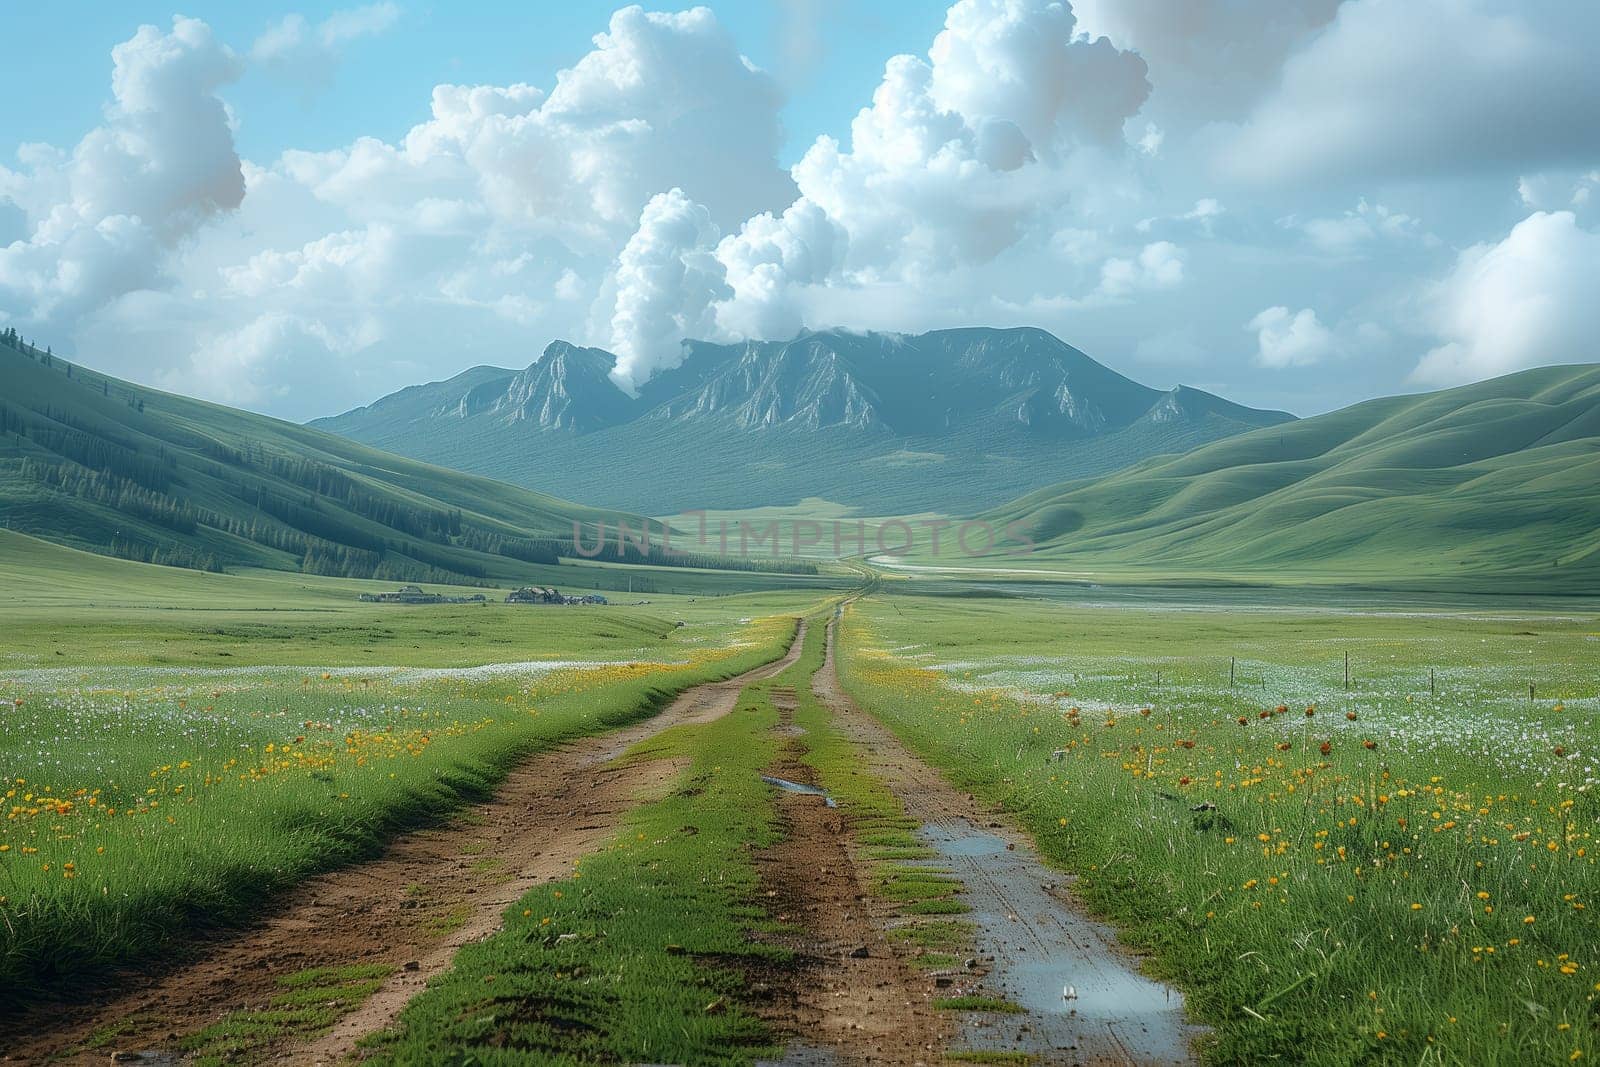 A dirt road passes through a grassy ecoregion with mountains in the background by richwolf